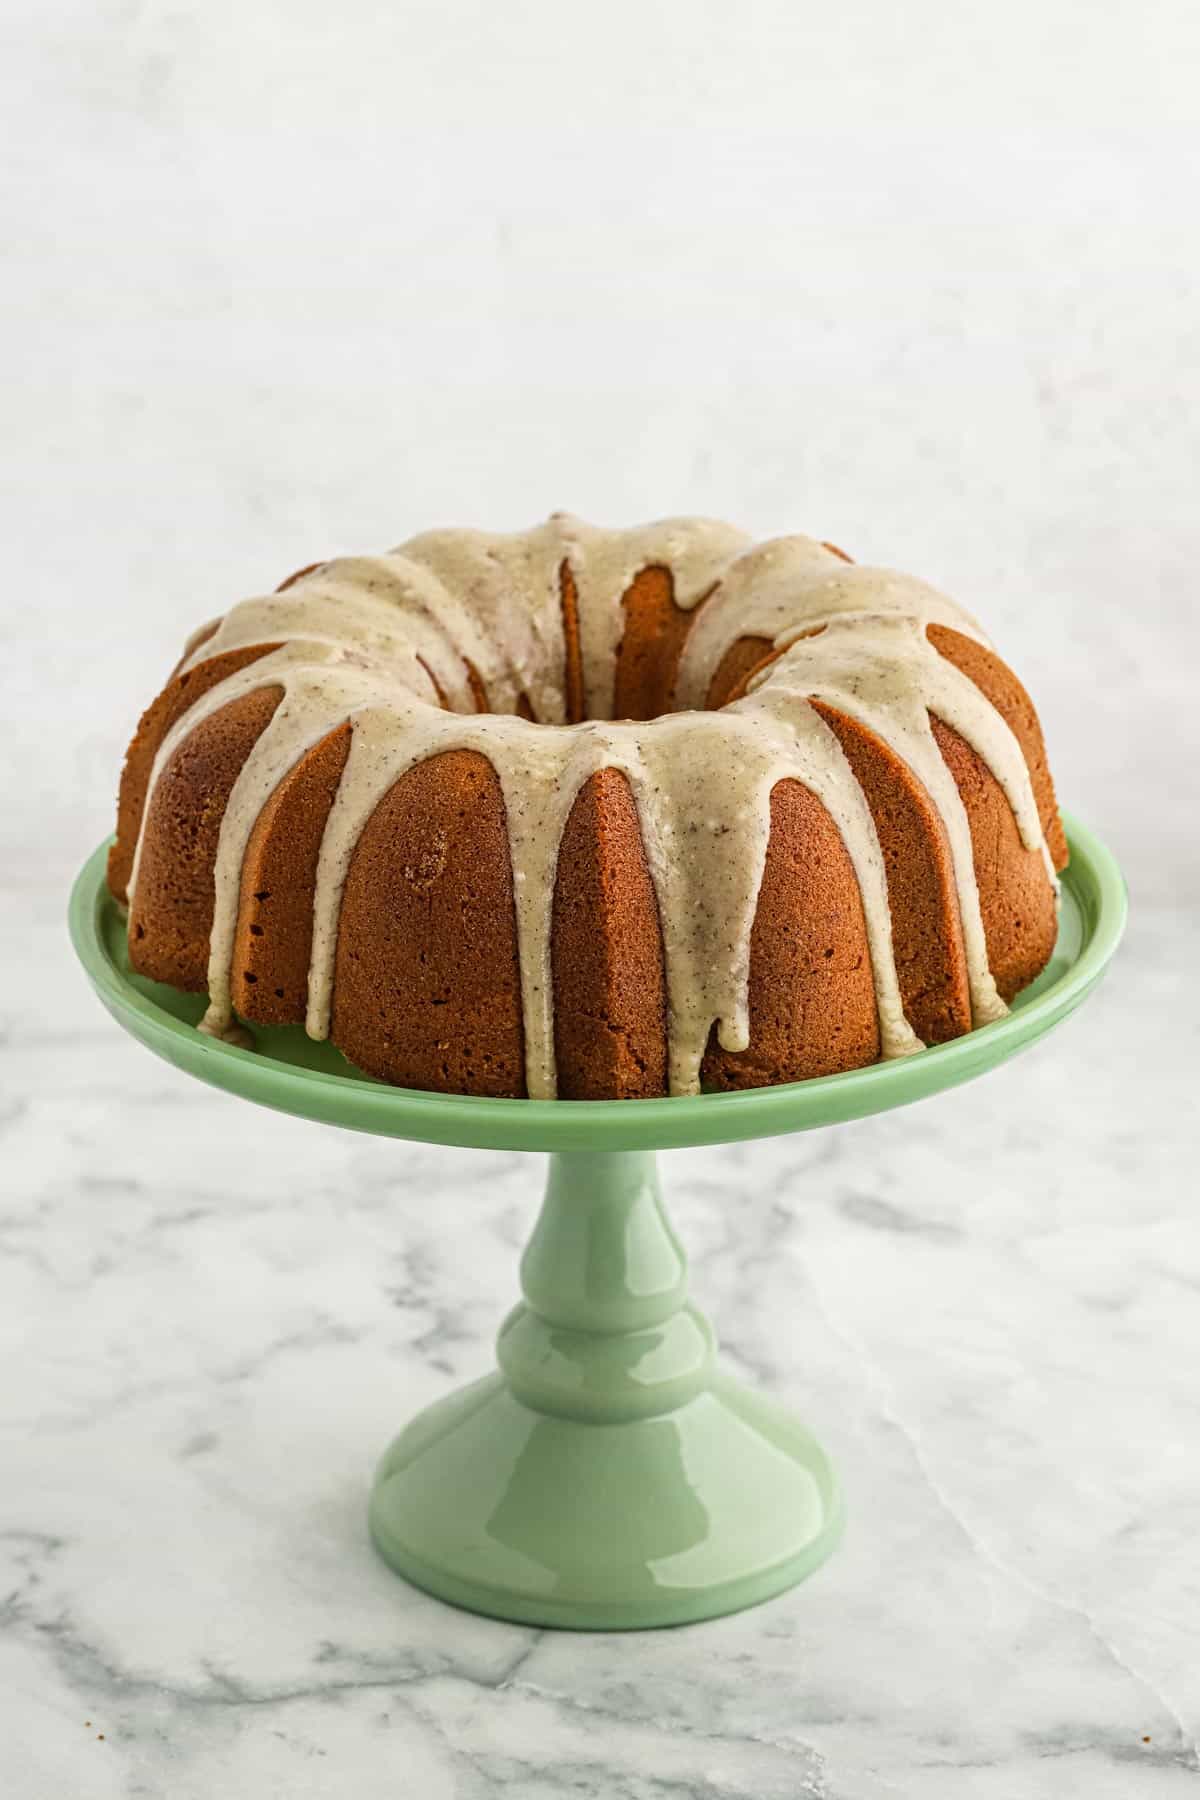 Brown sugar pound cake with glaze dripping down the sides on a green cake pedestal.